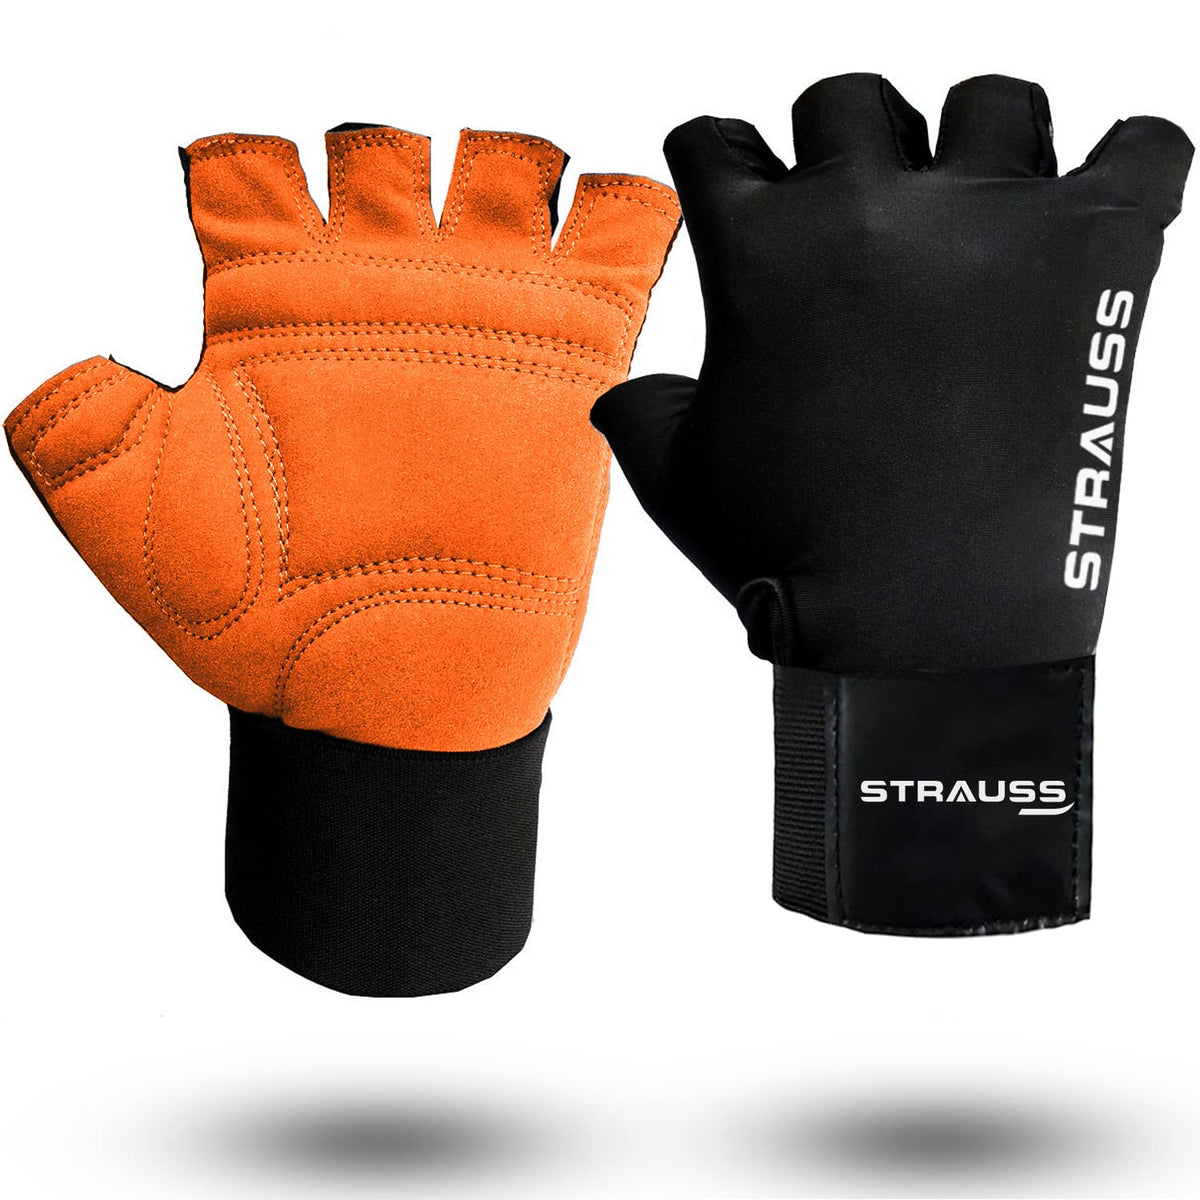 STRAUSS Suede Gym Gloves for Weightlifting, Training, Cycling, Exercise & Gym | Half Finger Design, 8mm Foam Cushioning, Anti-Slip & Breathable Lycra Material, (Black), (Medium)